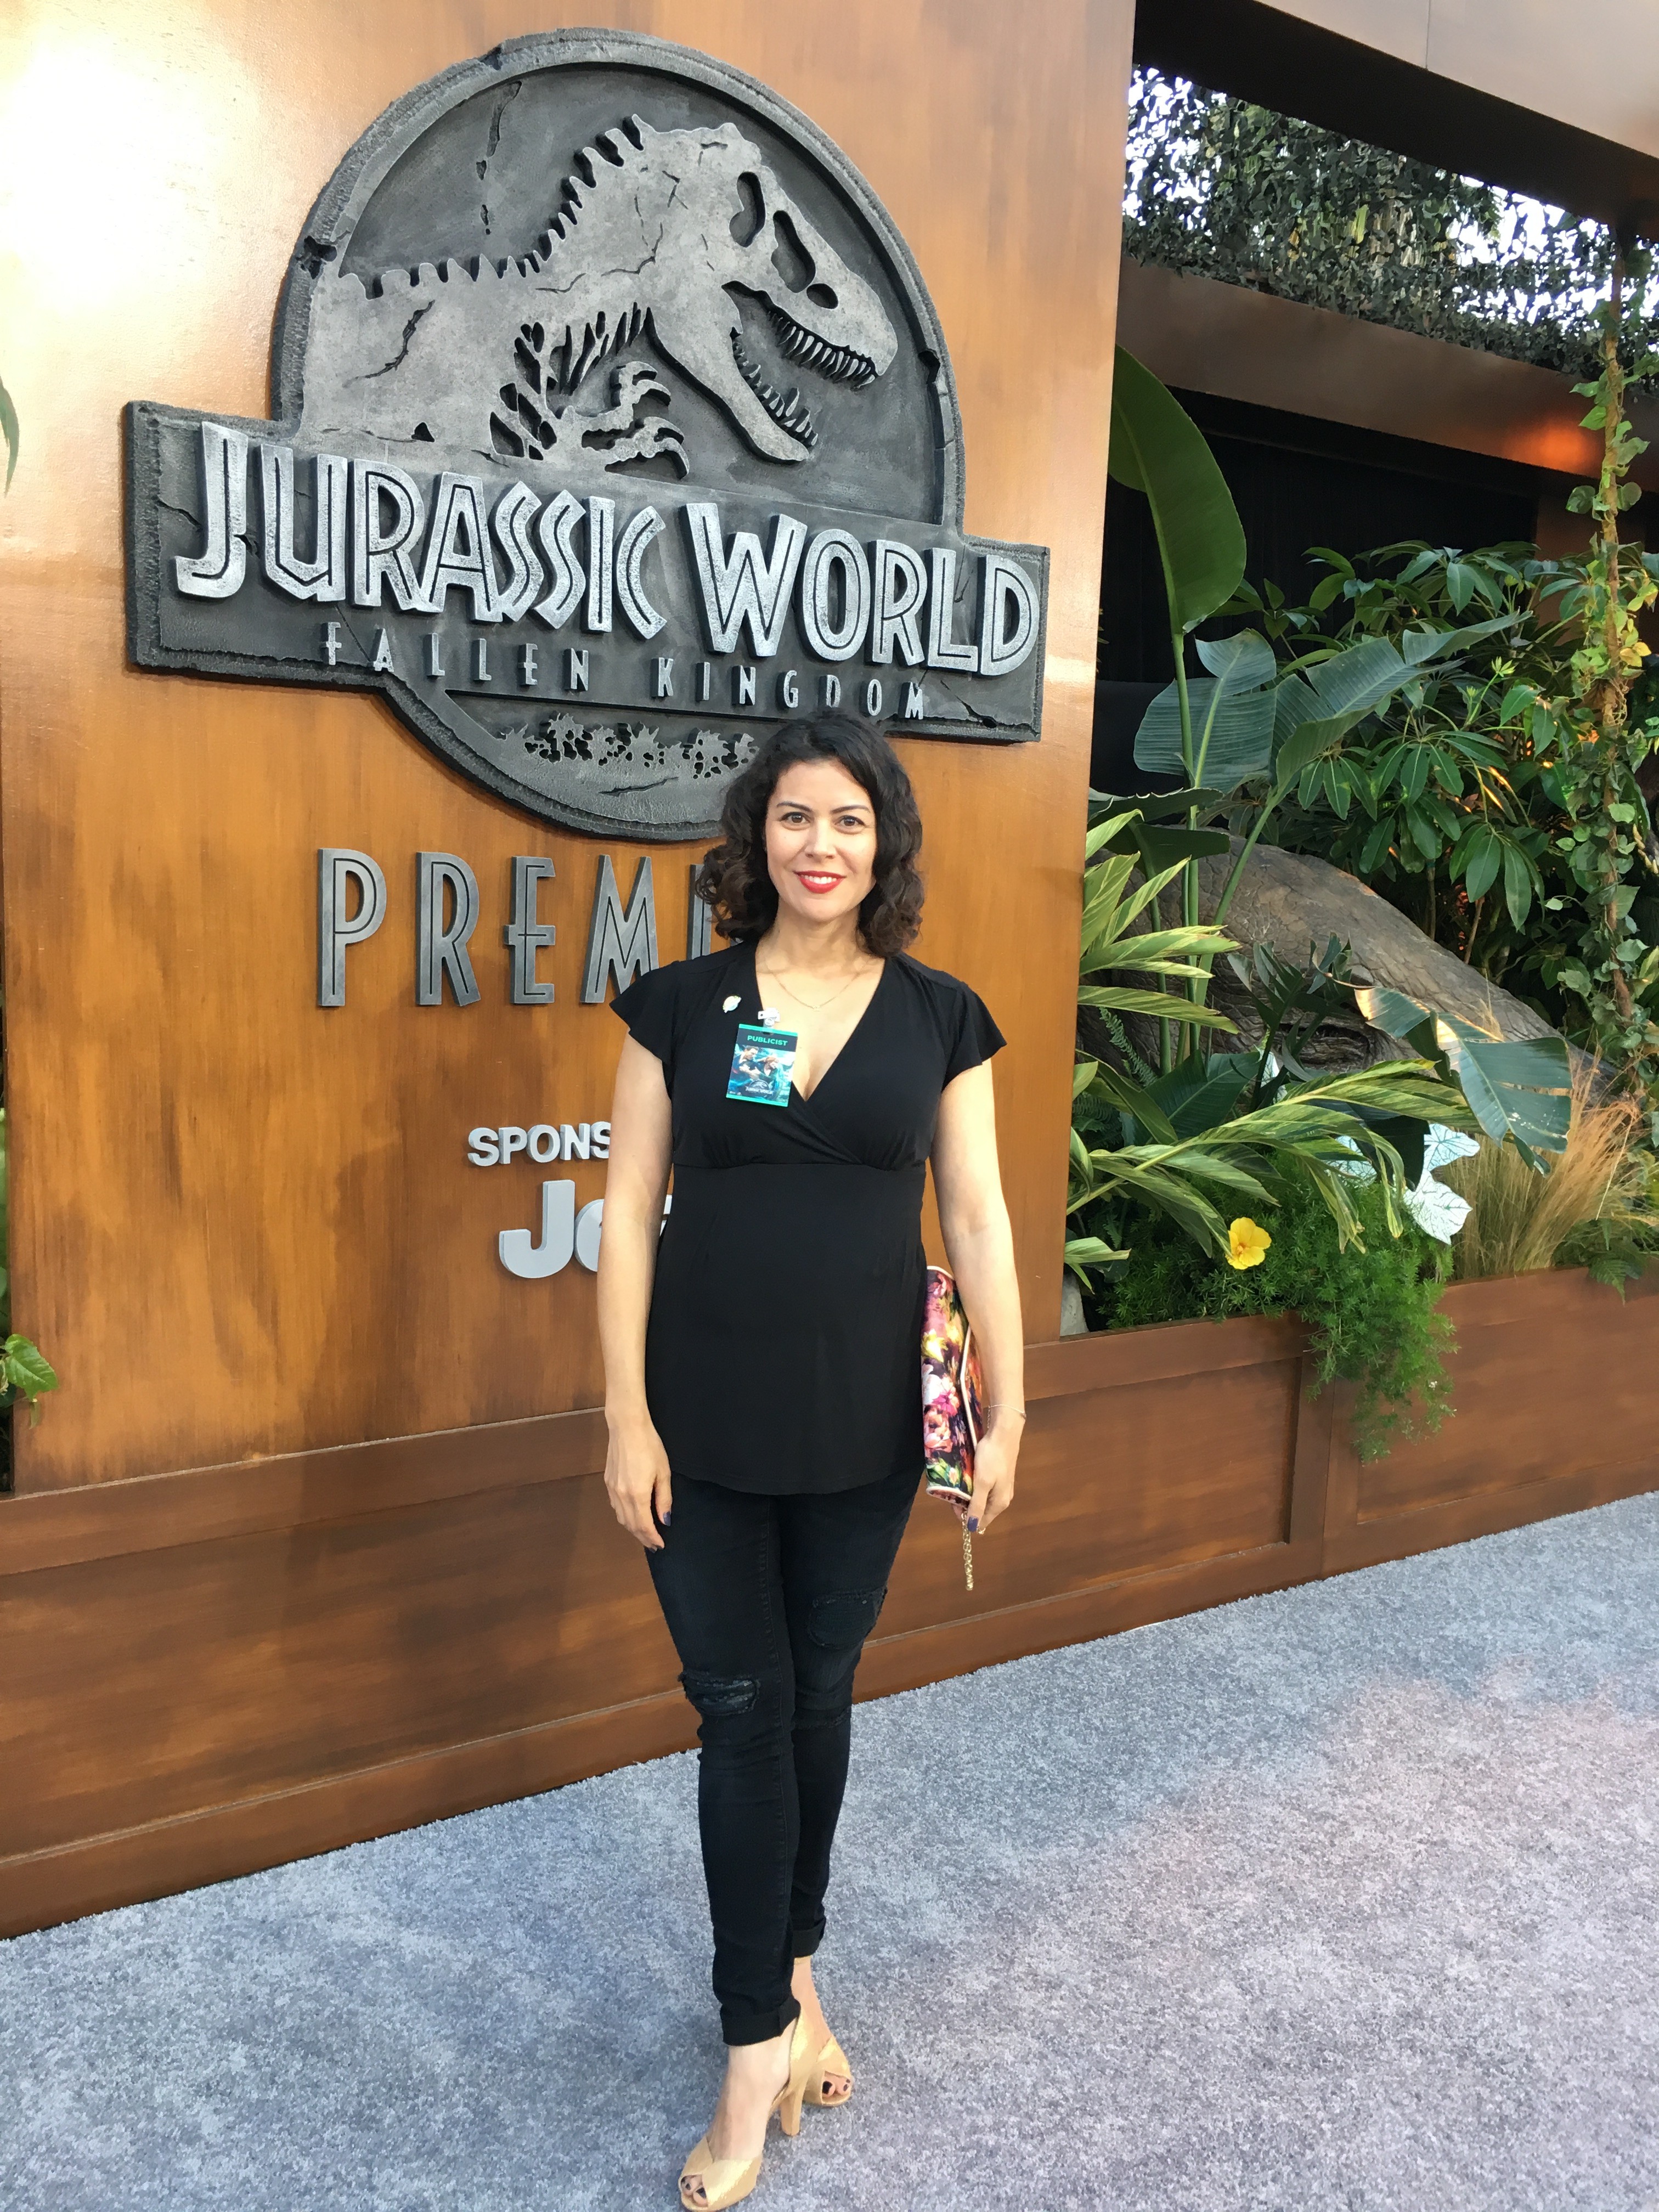 Actress Casey Dacanay attends the premiere of Jurassic World: Fallen Kingdom at Walt Disney Concert Hall